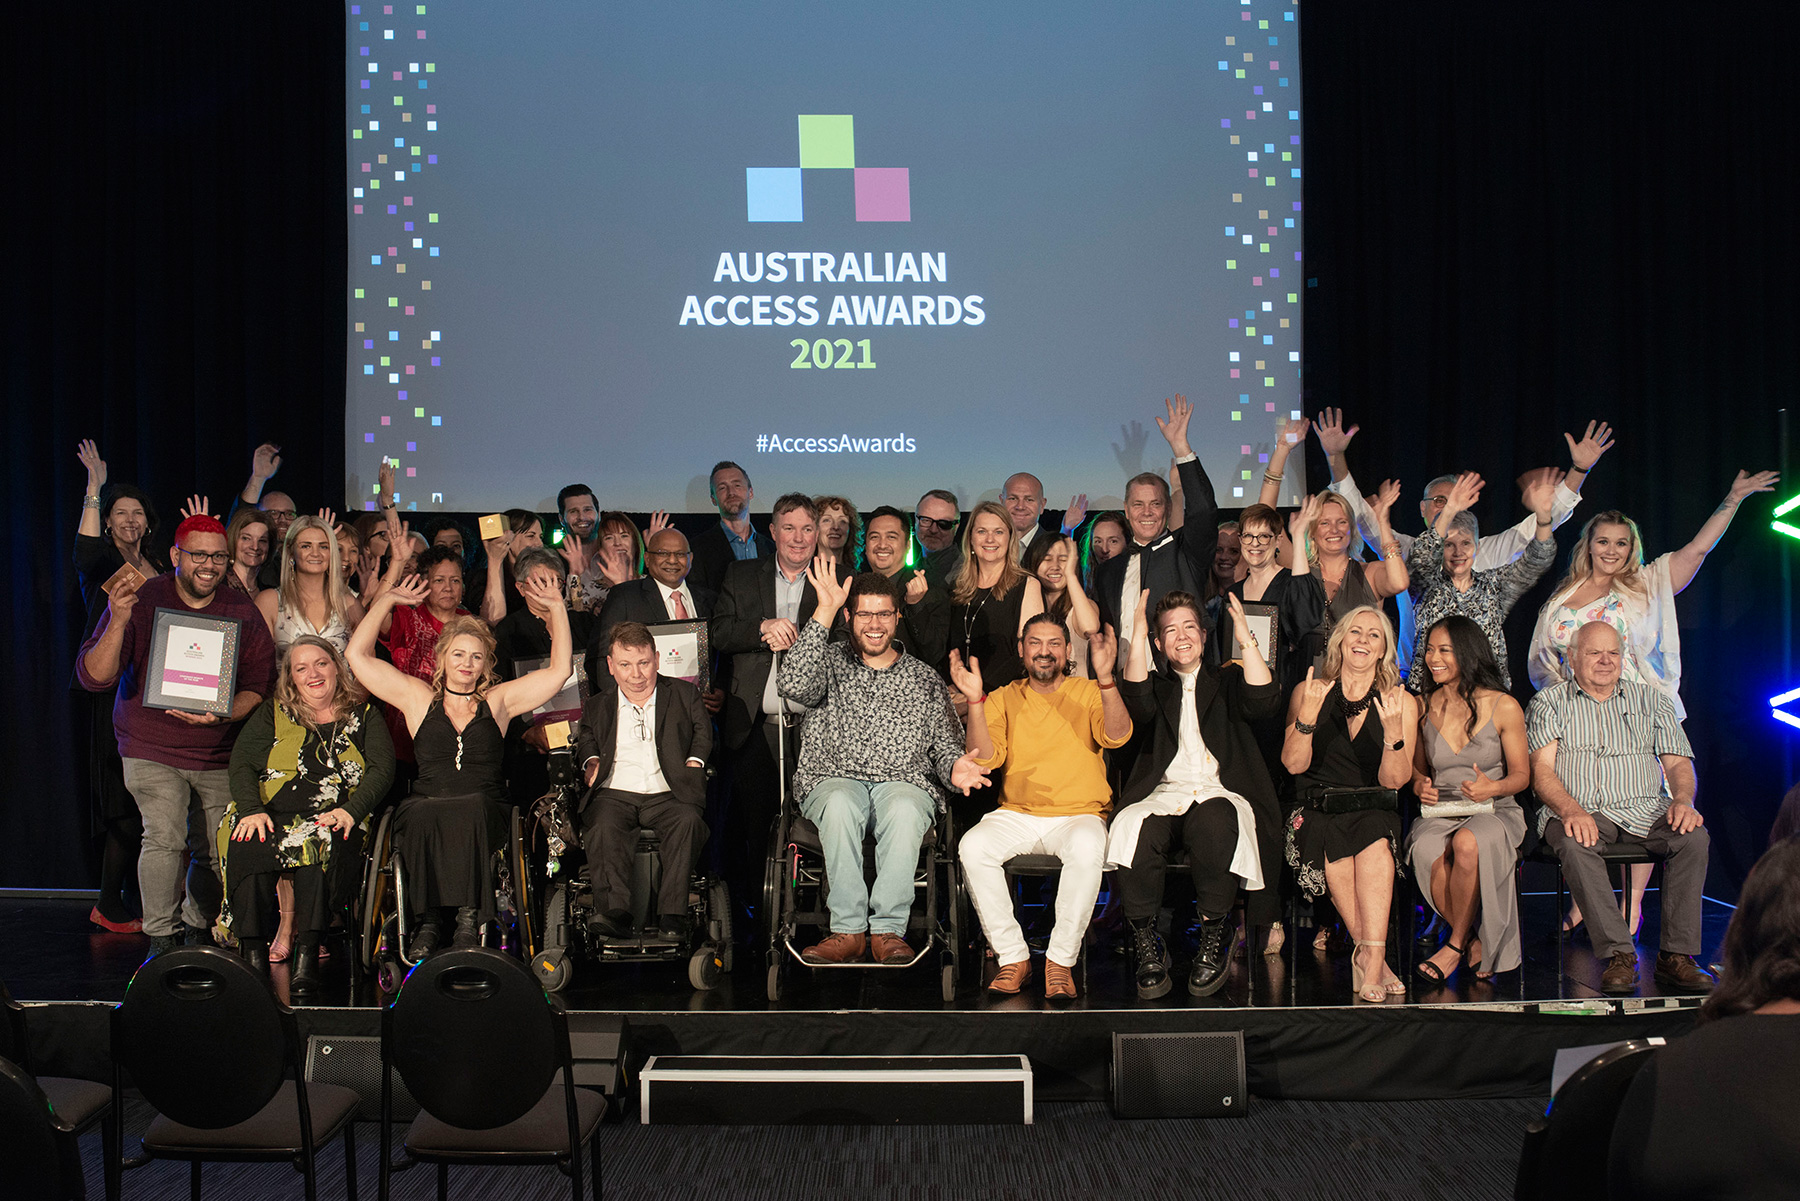 Group photo of award winners at the Australian Access Awards of 2021